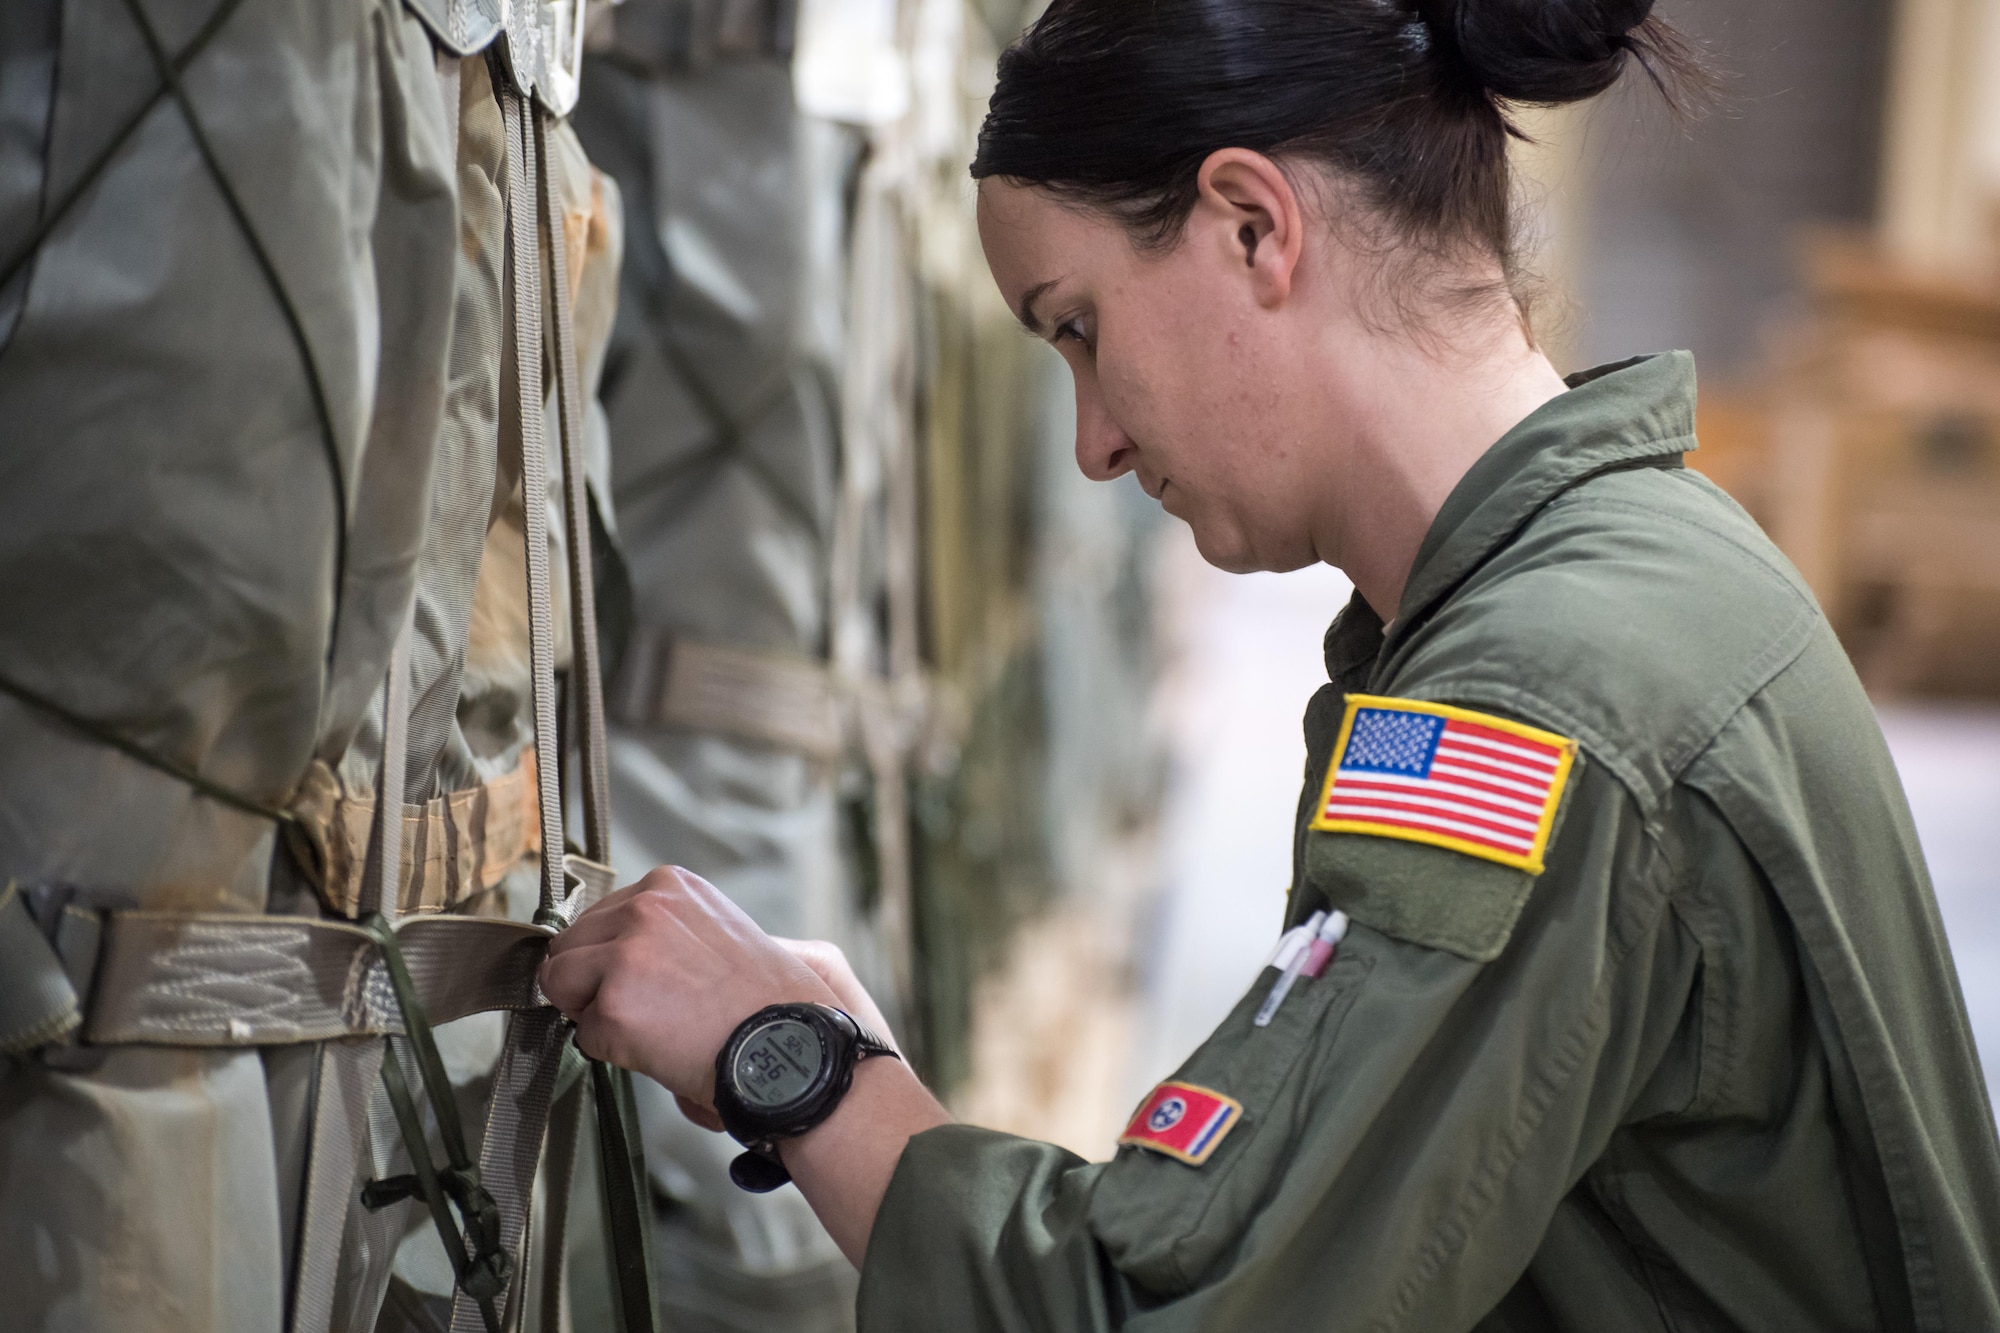 Staff Sgt. Casey Jackson, a 43d Operations Support Squadron joint airdrop inspector, inspects straps on a Container Delivery System -- or CDS -- while conducting an inspection of cargo at the Army’s Heavy Drop Rigging Facility here April 26. Jackson worked with fellow 43d OSS inspectors to ensure more than 200 tons of cargo were ready for airdrop from Air Force C-17s and C-130s flying out of Pope Field during a large package joint training exercise April 26-30. The 43d OSS is part of the Air Force’s 43d Air Mobility Operations Group, which provides 24/7 operational and training mission support for visiting Air Mobility Command aircraft and crews, for the 82nd Airborne Division and other Army units here, and for joint special forces units at Fort Bragg. (U.S. Air Force photo/Marc Barnes)